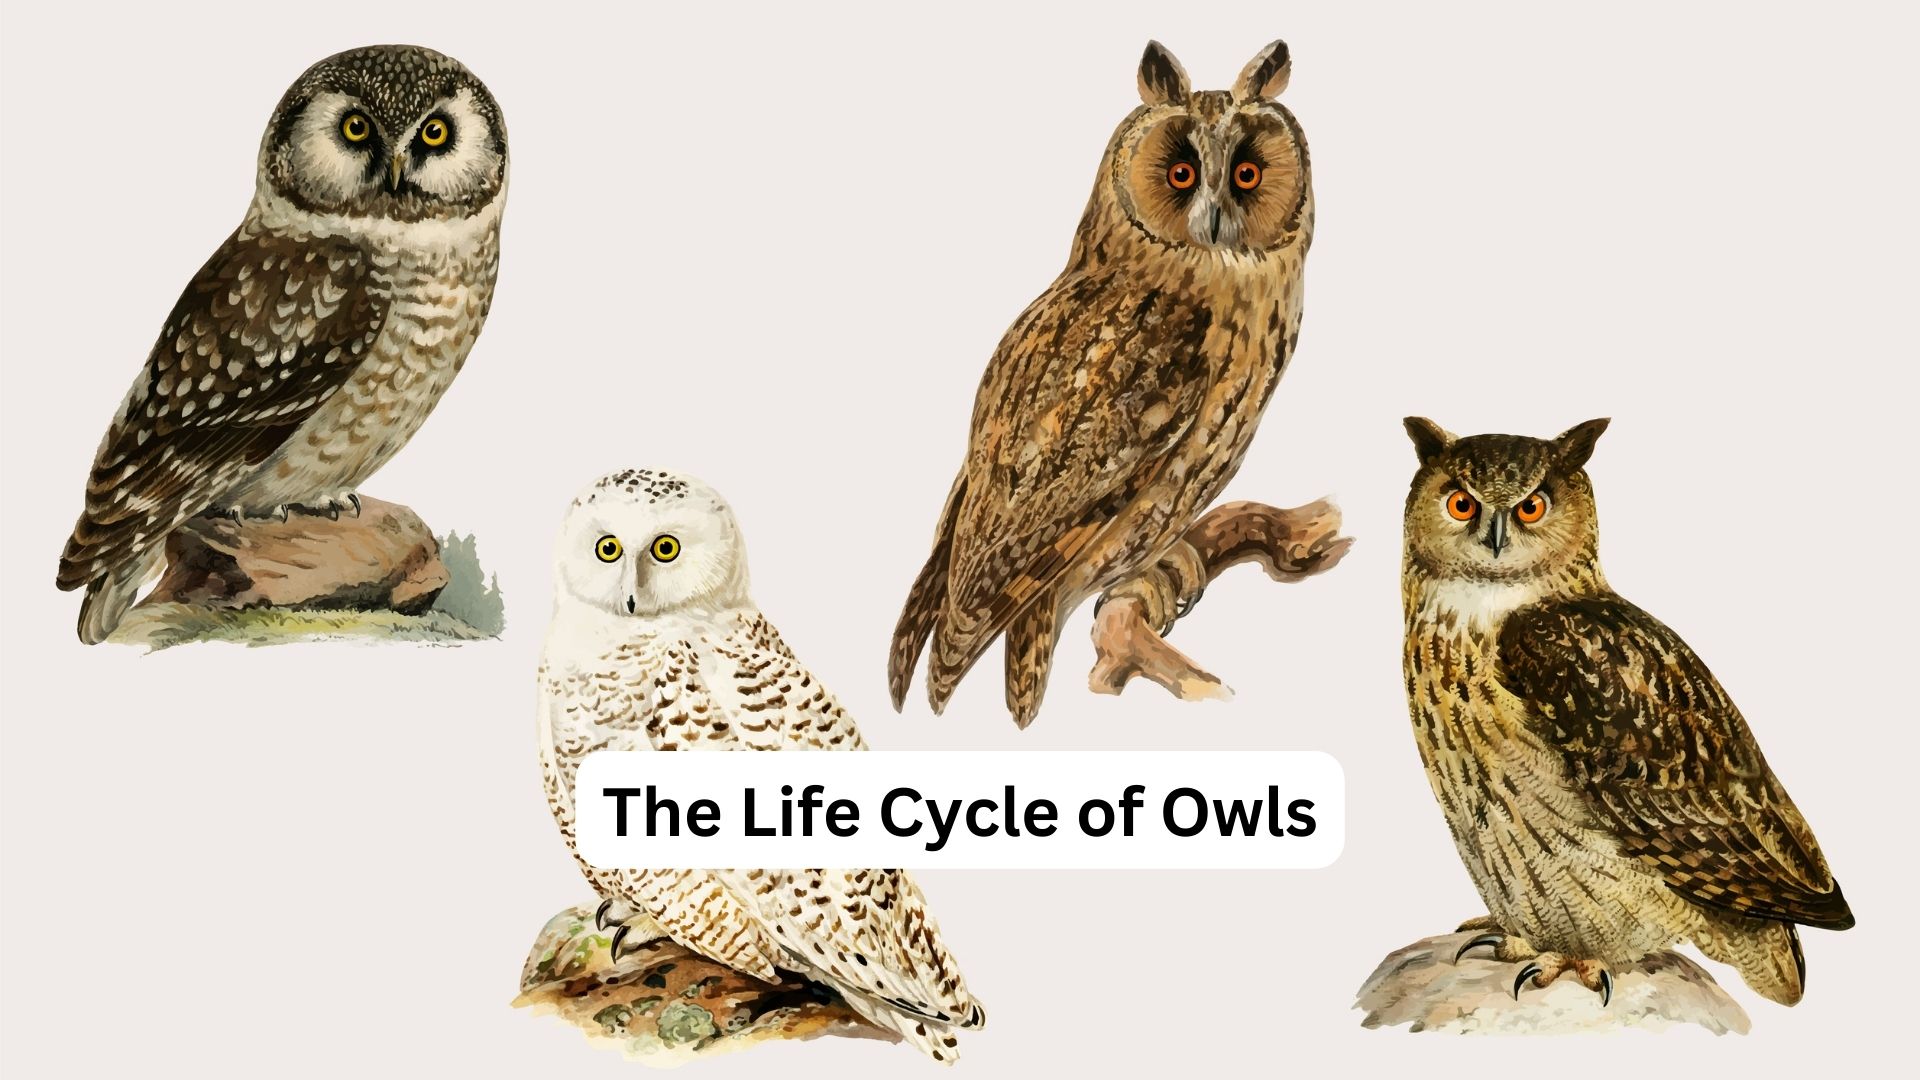 The Life Cycle of Owls